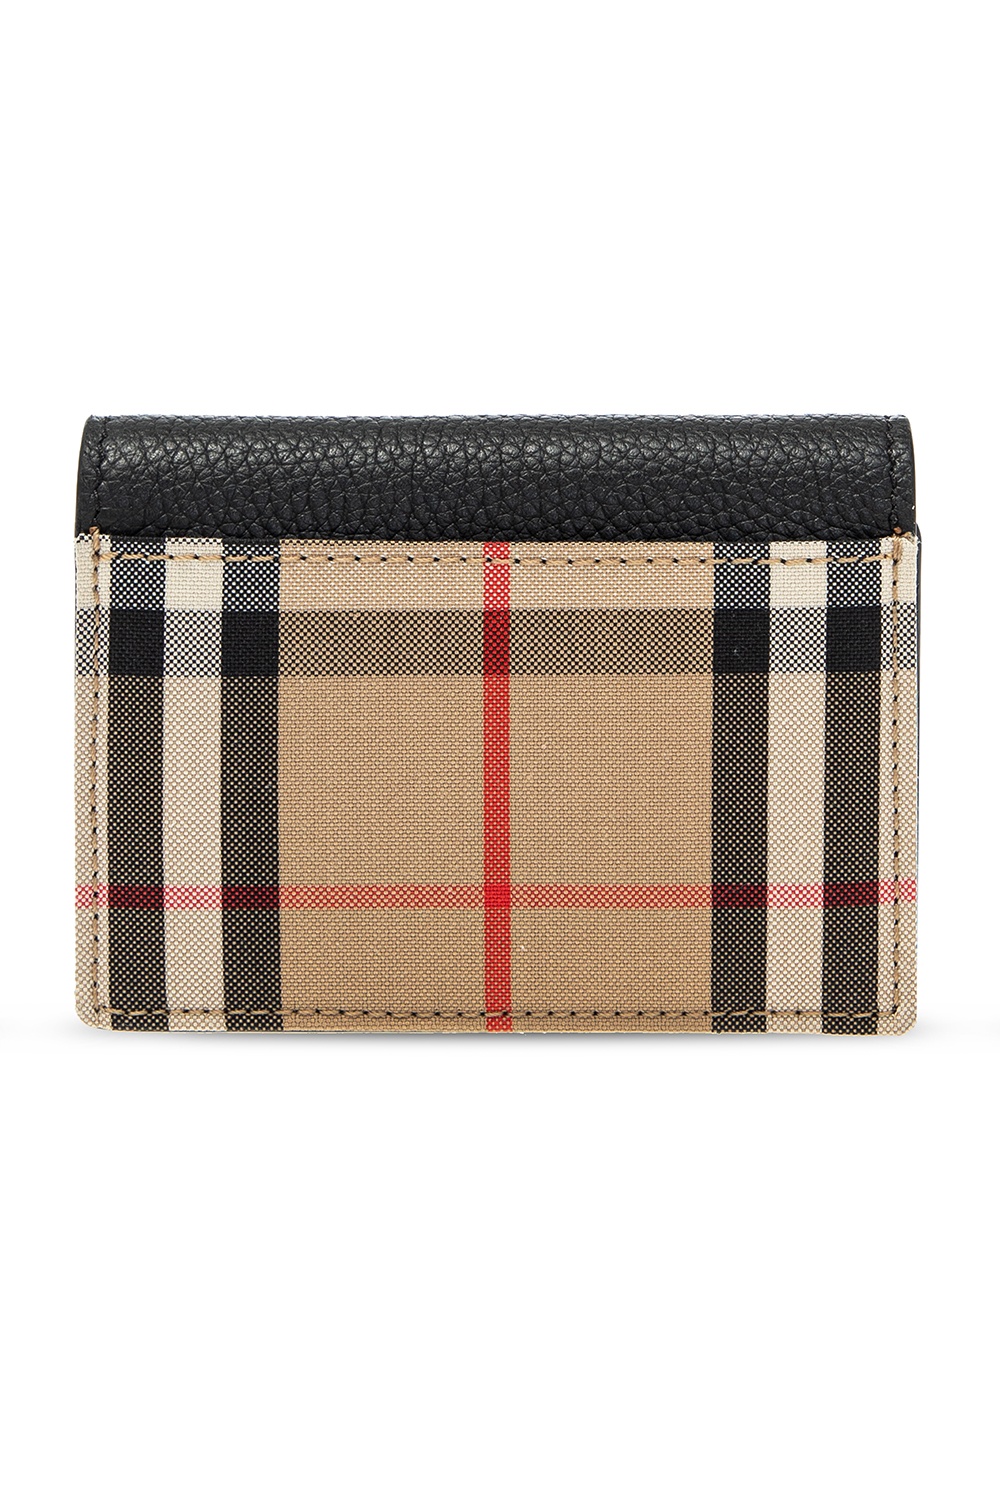 Burberry Check Cardholder With Chain in White